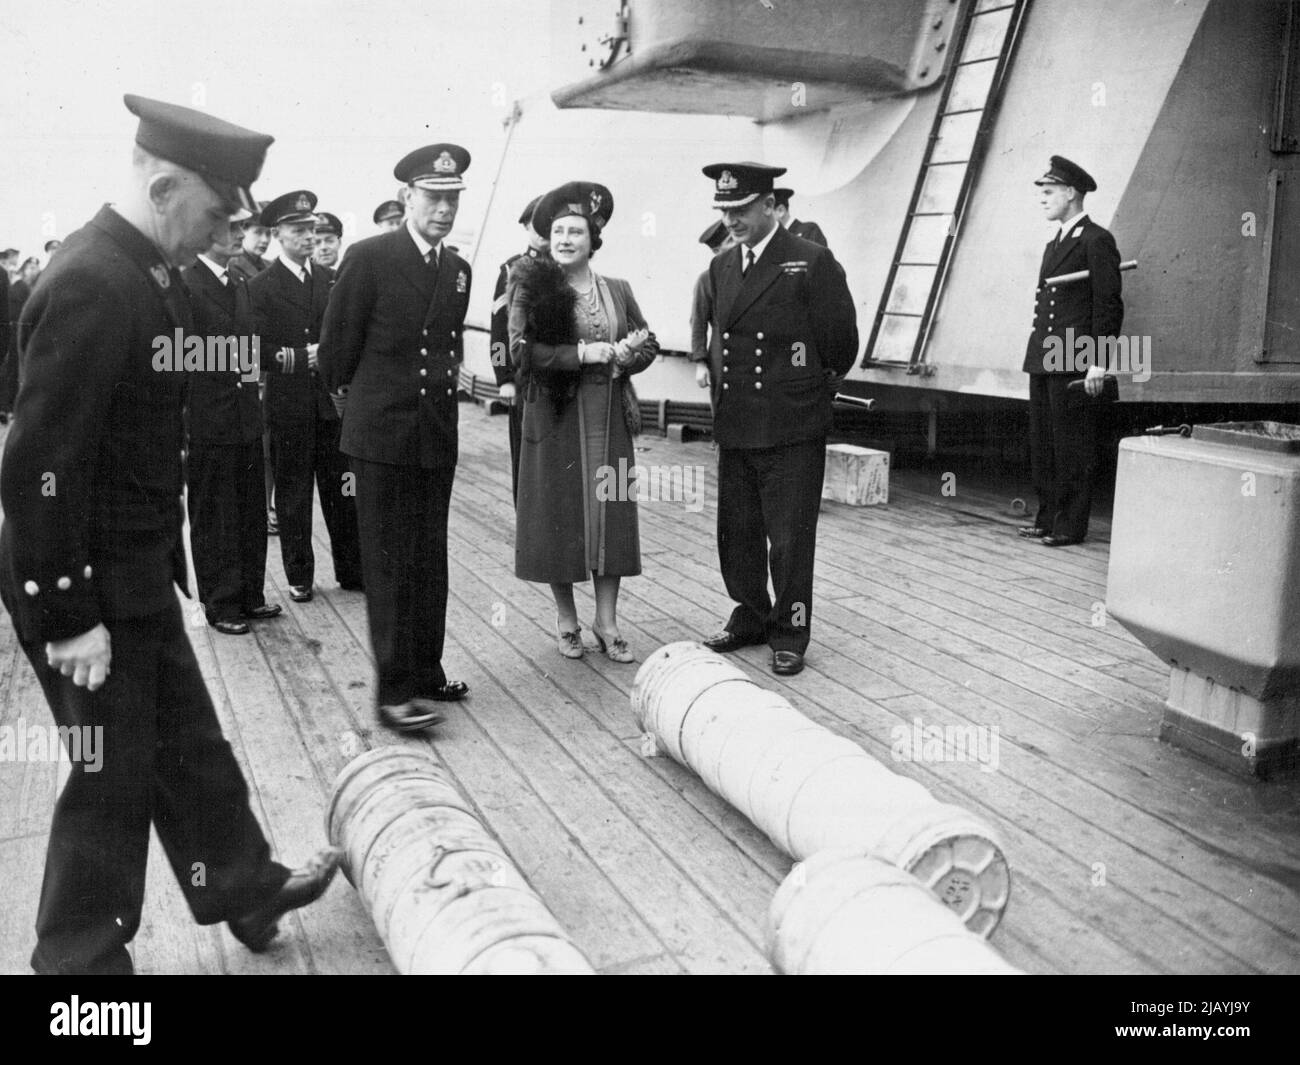 Royal Visit to Famous British Battleship - The King and Queen with the Commanding Officer of the King George V - Captain T. E. Halsey, D.S.O., R.N., watching 14-inch cordite charges being rolled across the deck. Picture taken at a Northern Base when the King and Queen accompanied by Princess Elizabeth and Princess Margaret, paid a farewell visit to he British Battle-ship King George V before she left to join Britain's East Indies Fleet. It is now revealed that the King George V took part in tie great air-sea operations against Japanese oil supplies in Sumatra. April 16, 1945. (Photo by PNA). Stock Photo